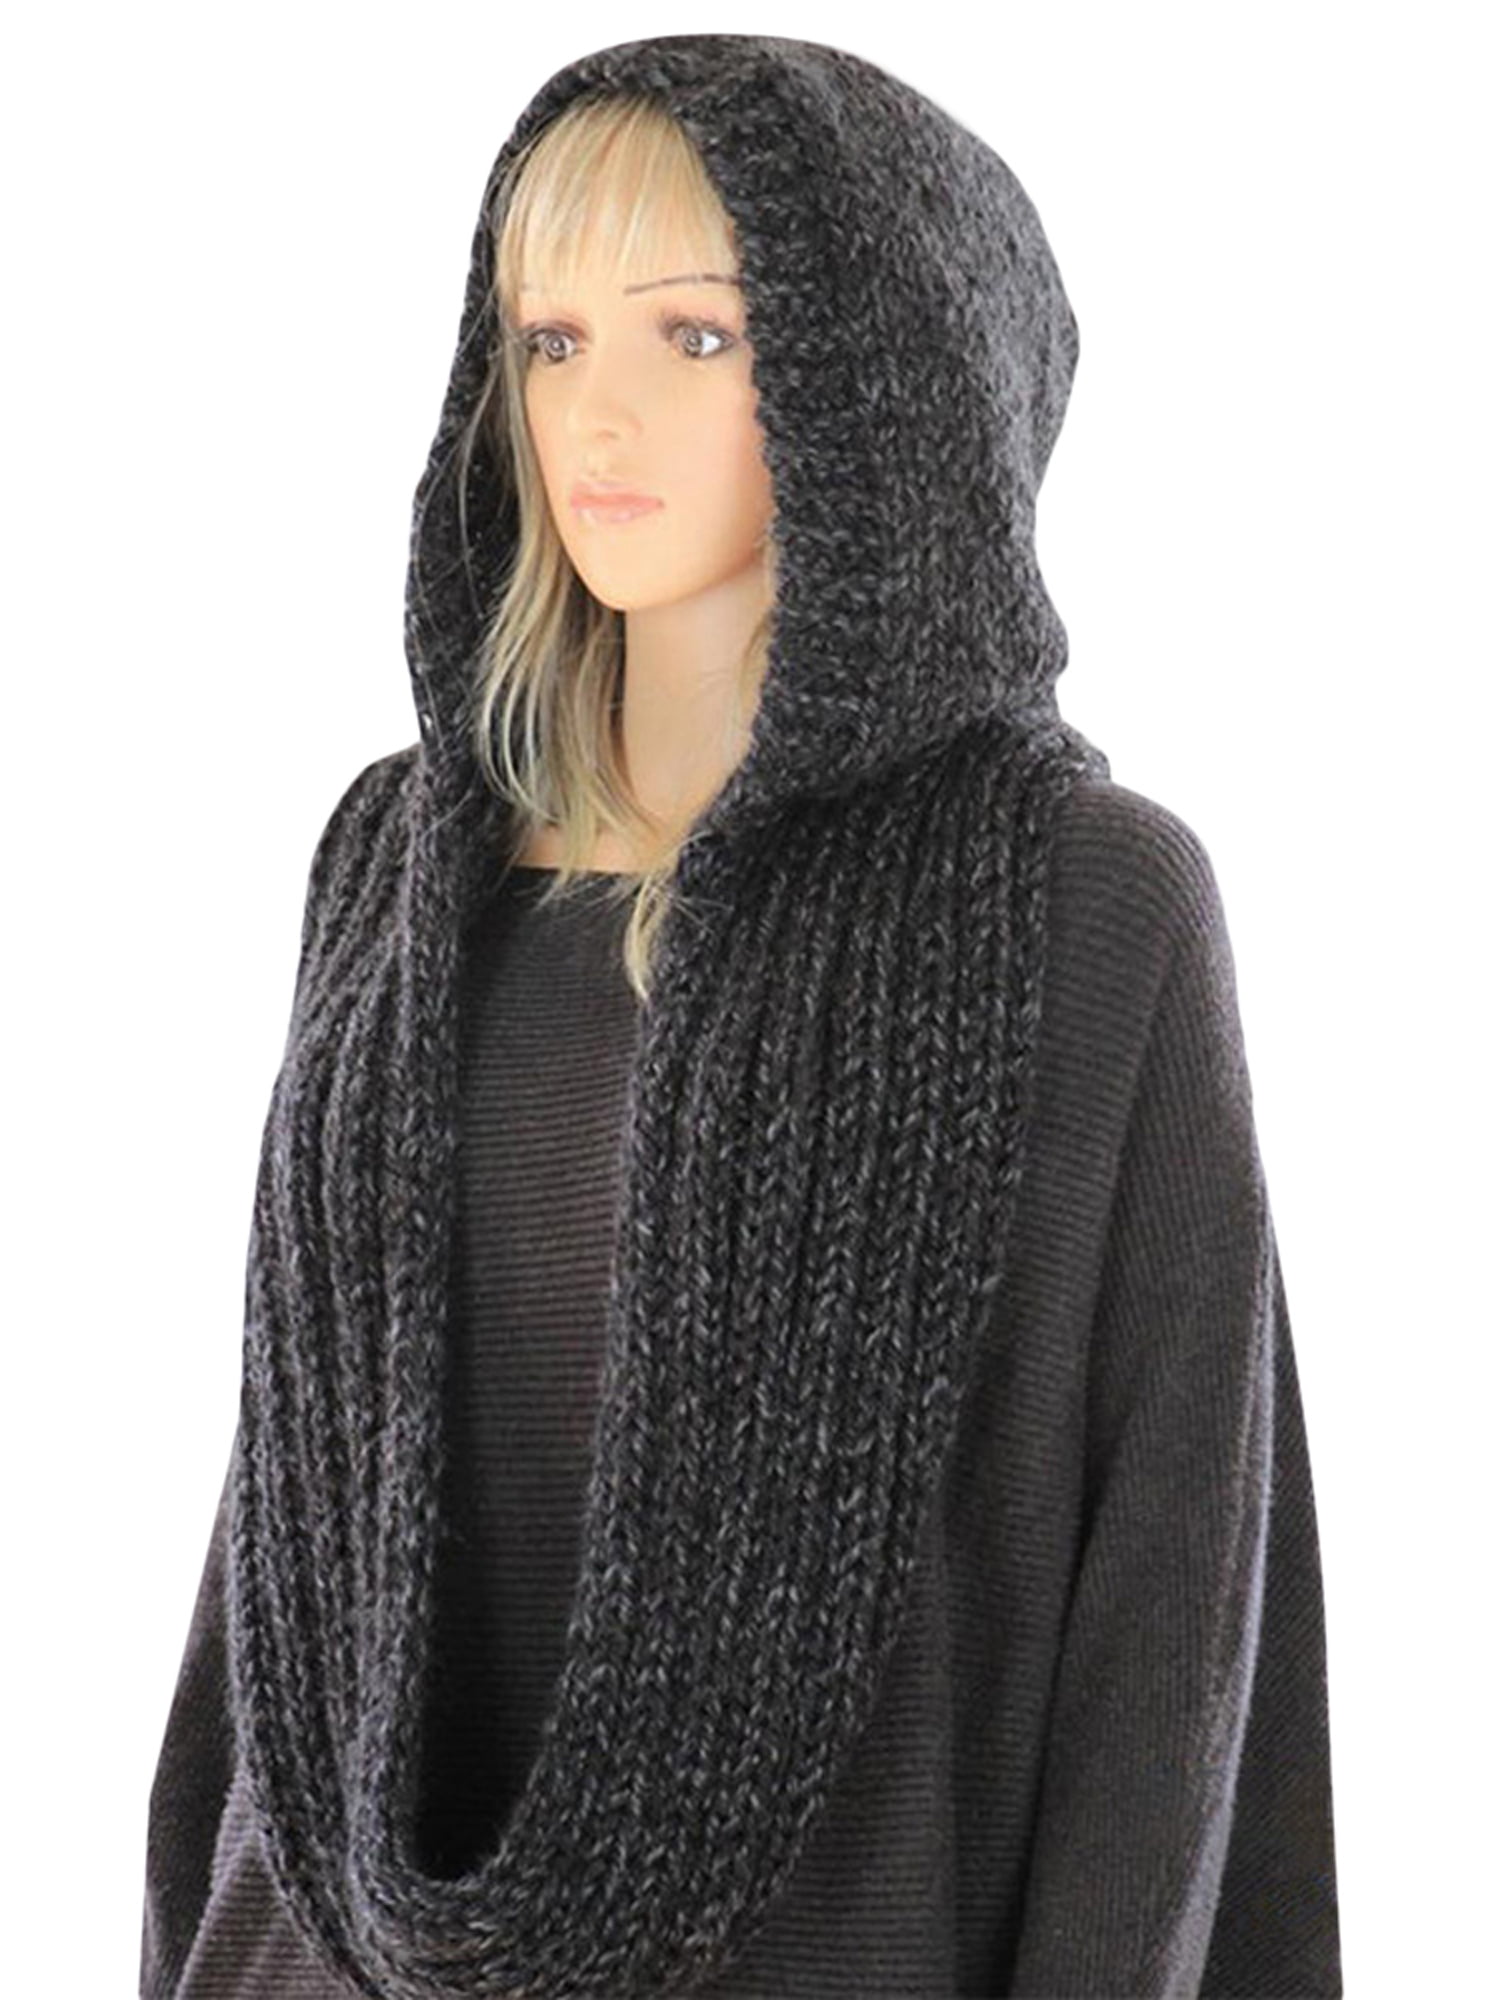 Crochet Hooded Scarf Hooded Scarf Earthy Colours Hooded Scarf Triangle Scarf Womens Hooded Scarf Gift For Women Hooded Shawl